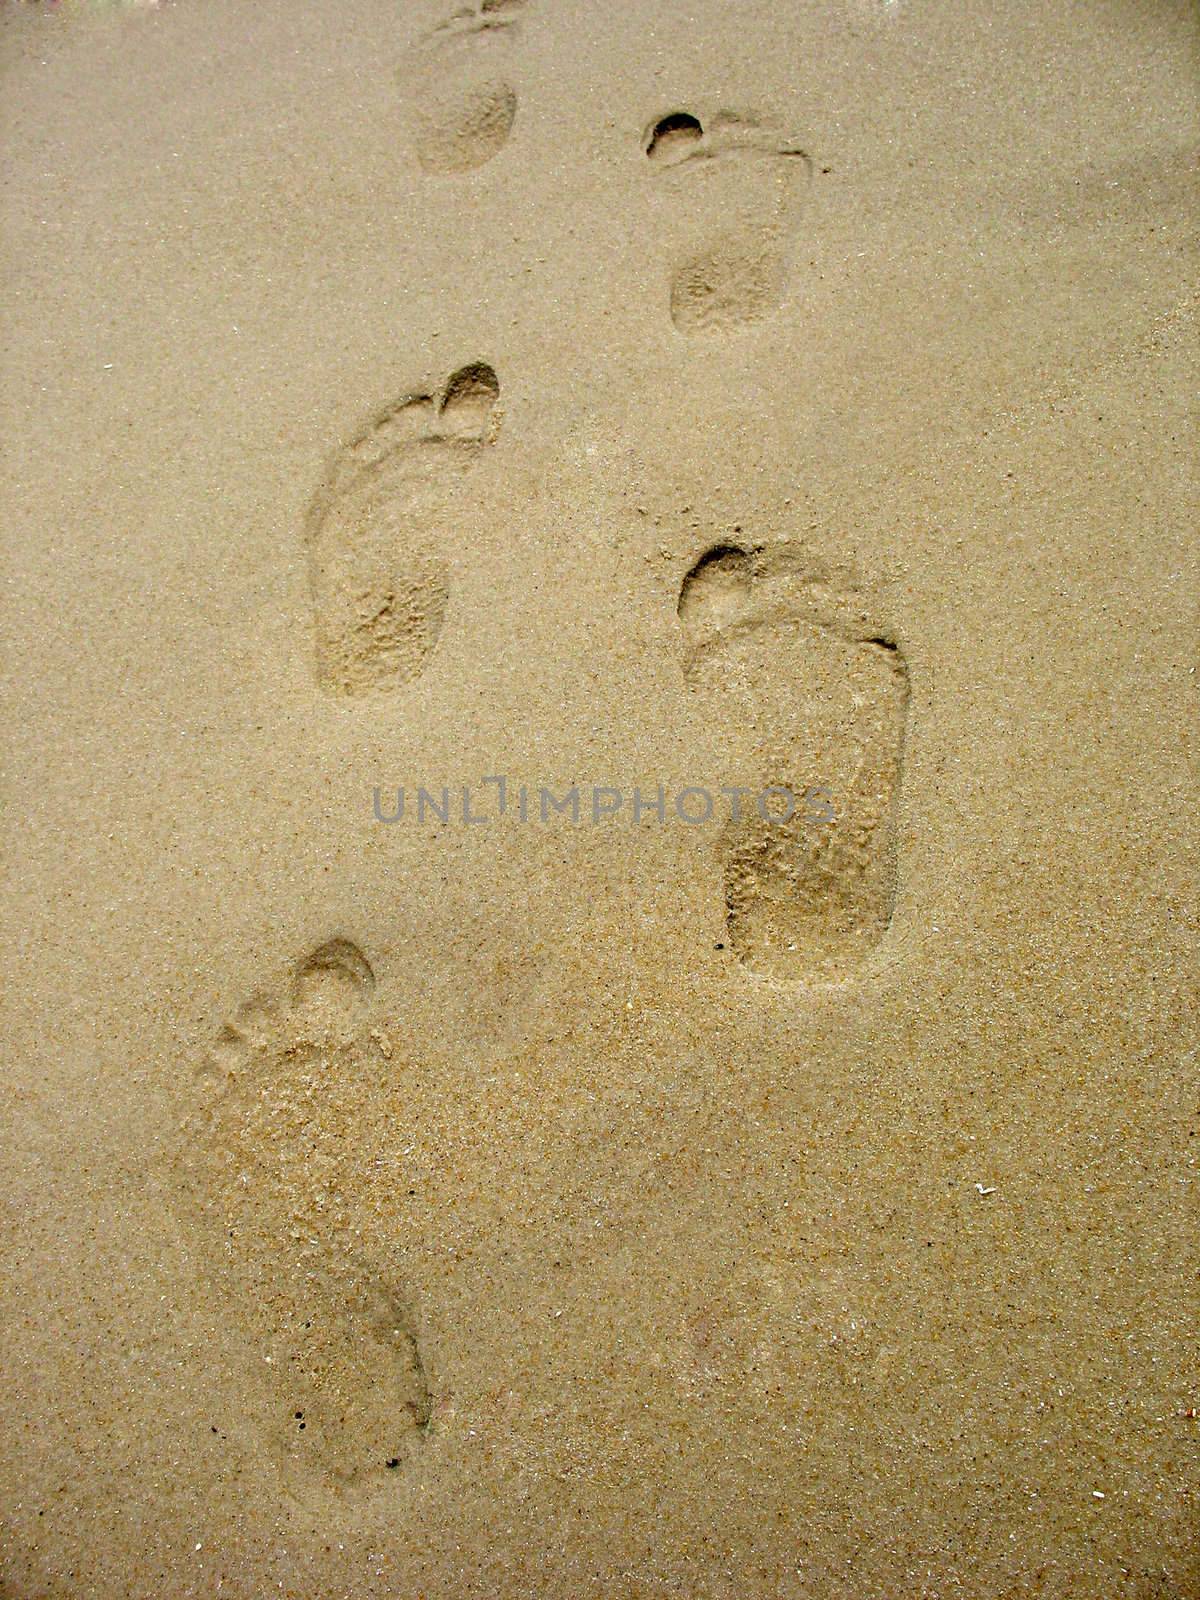 Footprints in the sand on the beach.  This can be used for a wide range of concepts.